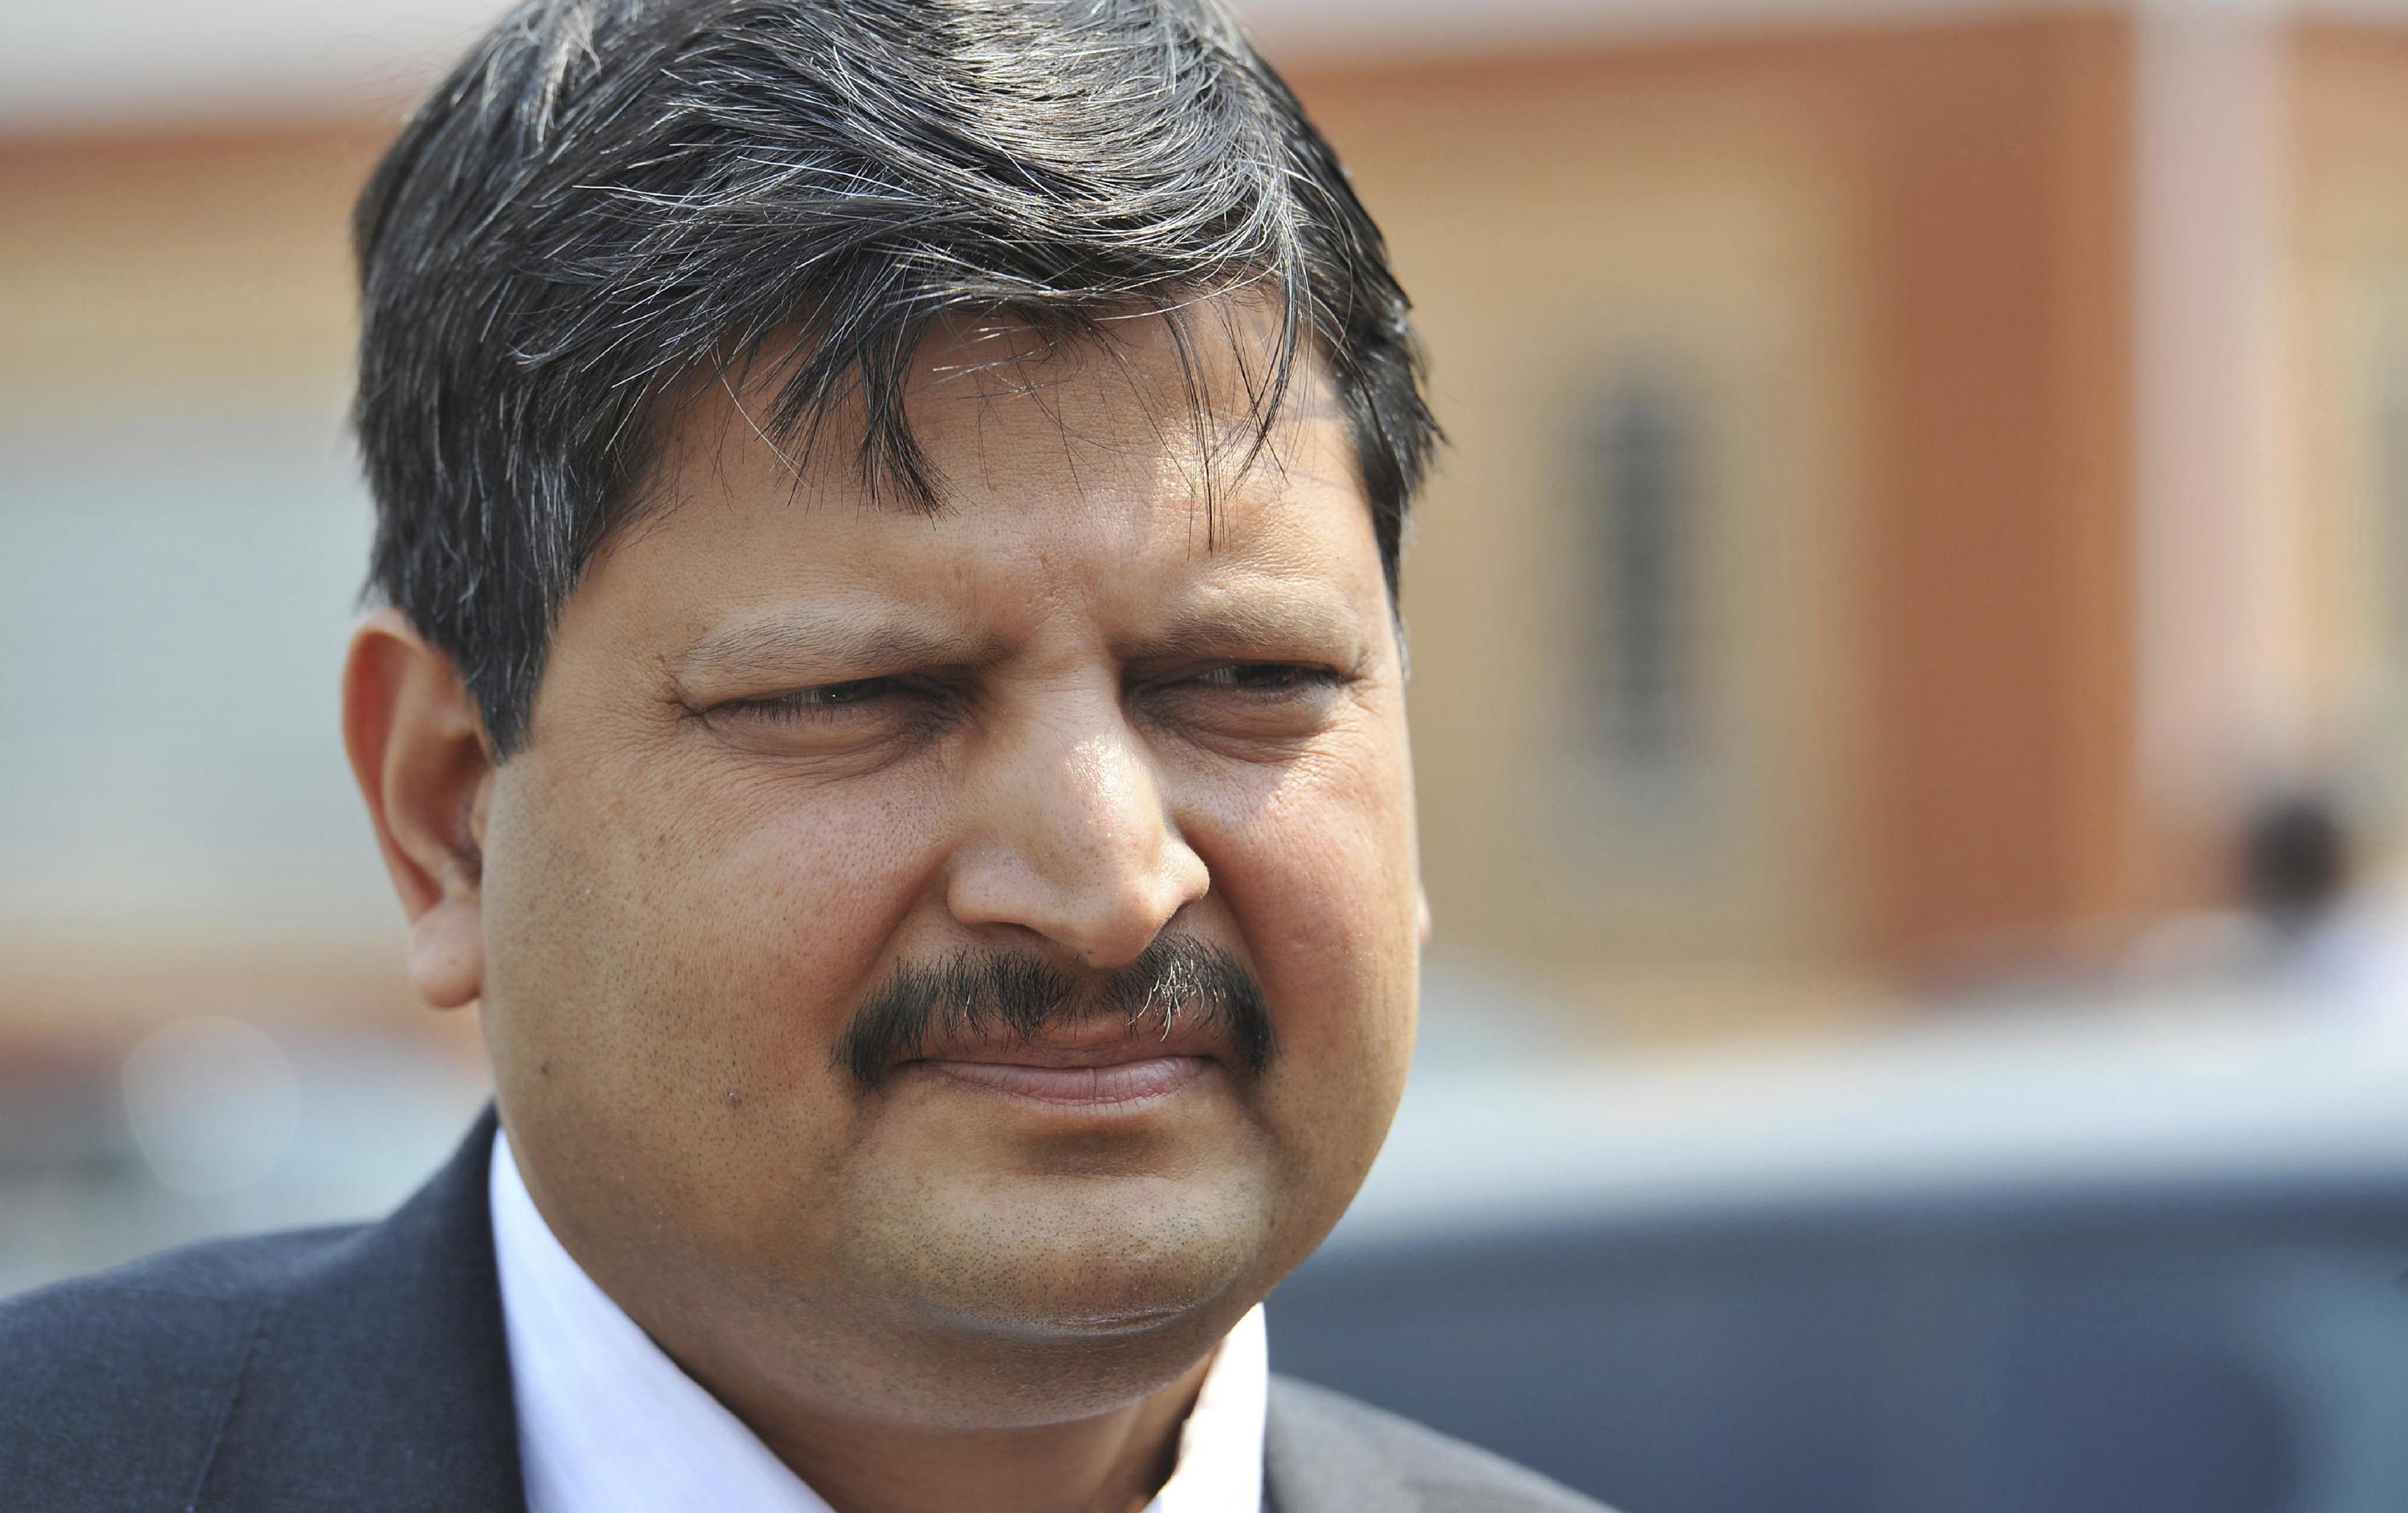 Dubai arrests 2 Gupta brothers over South African fraud case